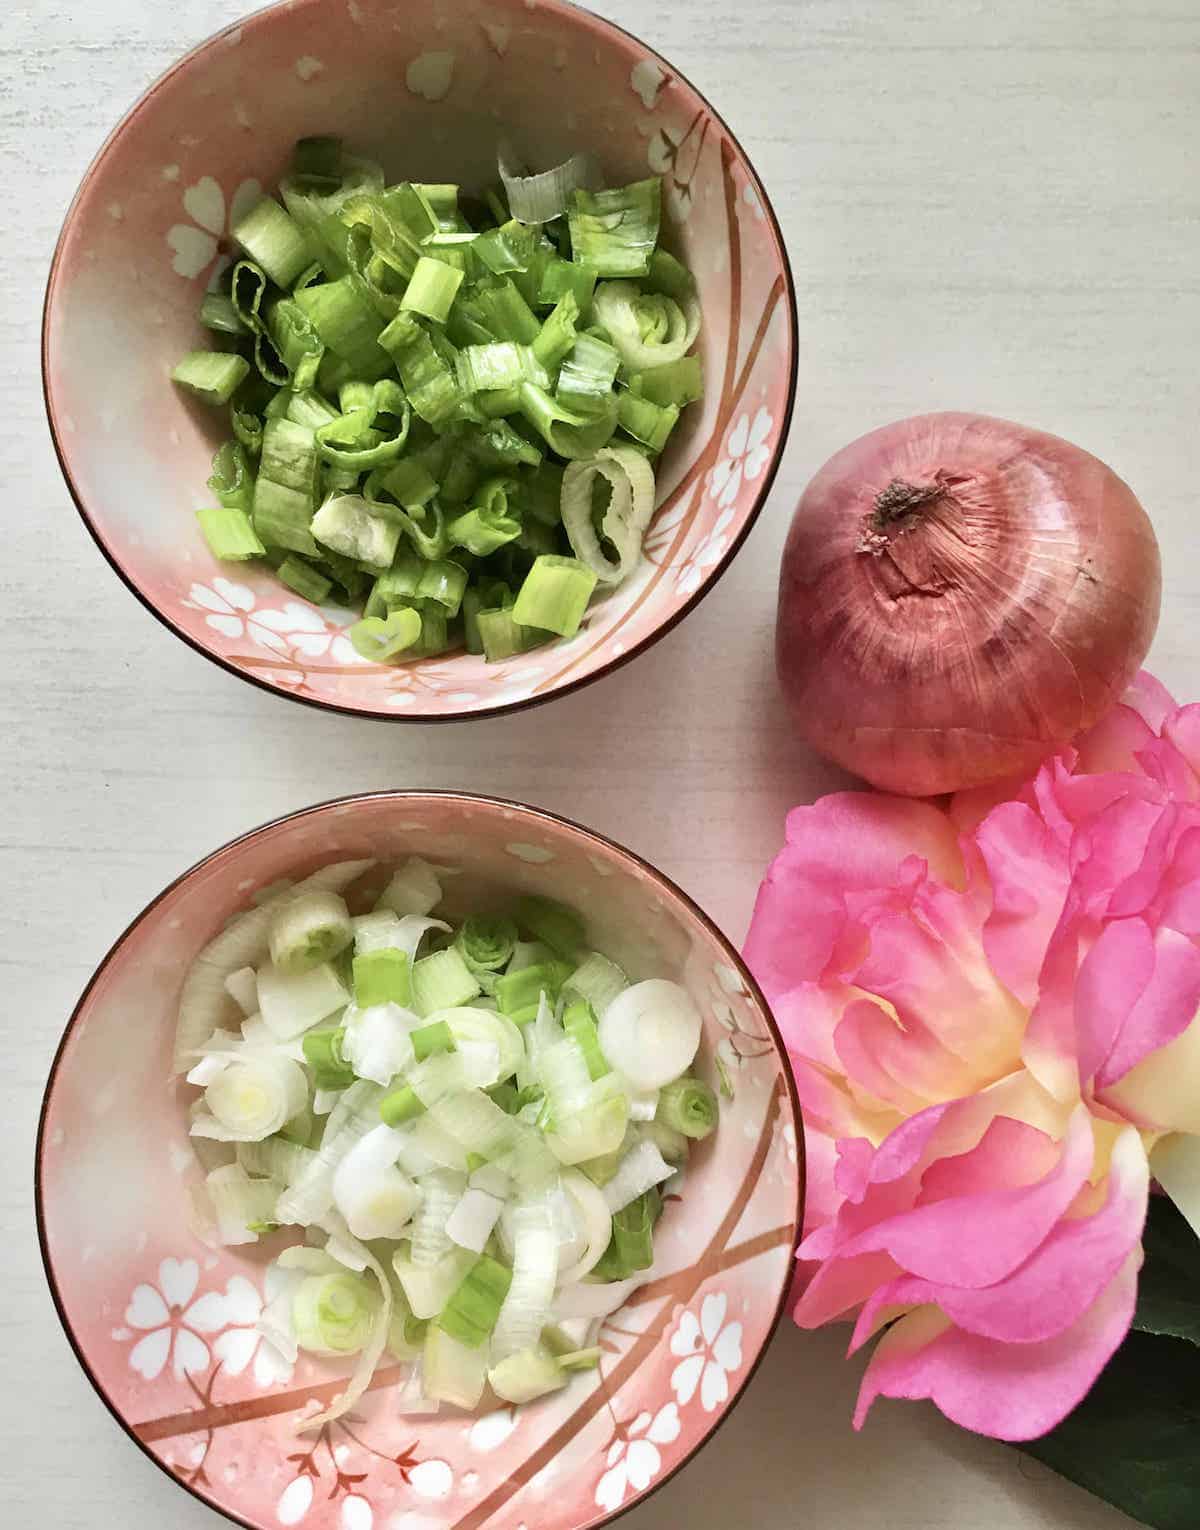 2 bowls of sliced spring onions, divided into the green and white parts.